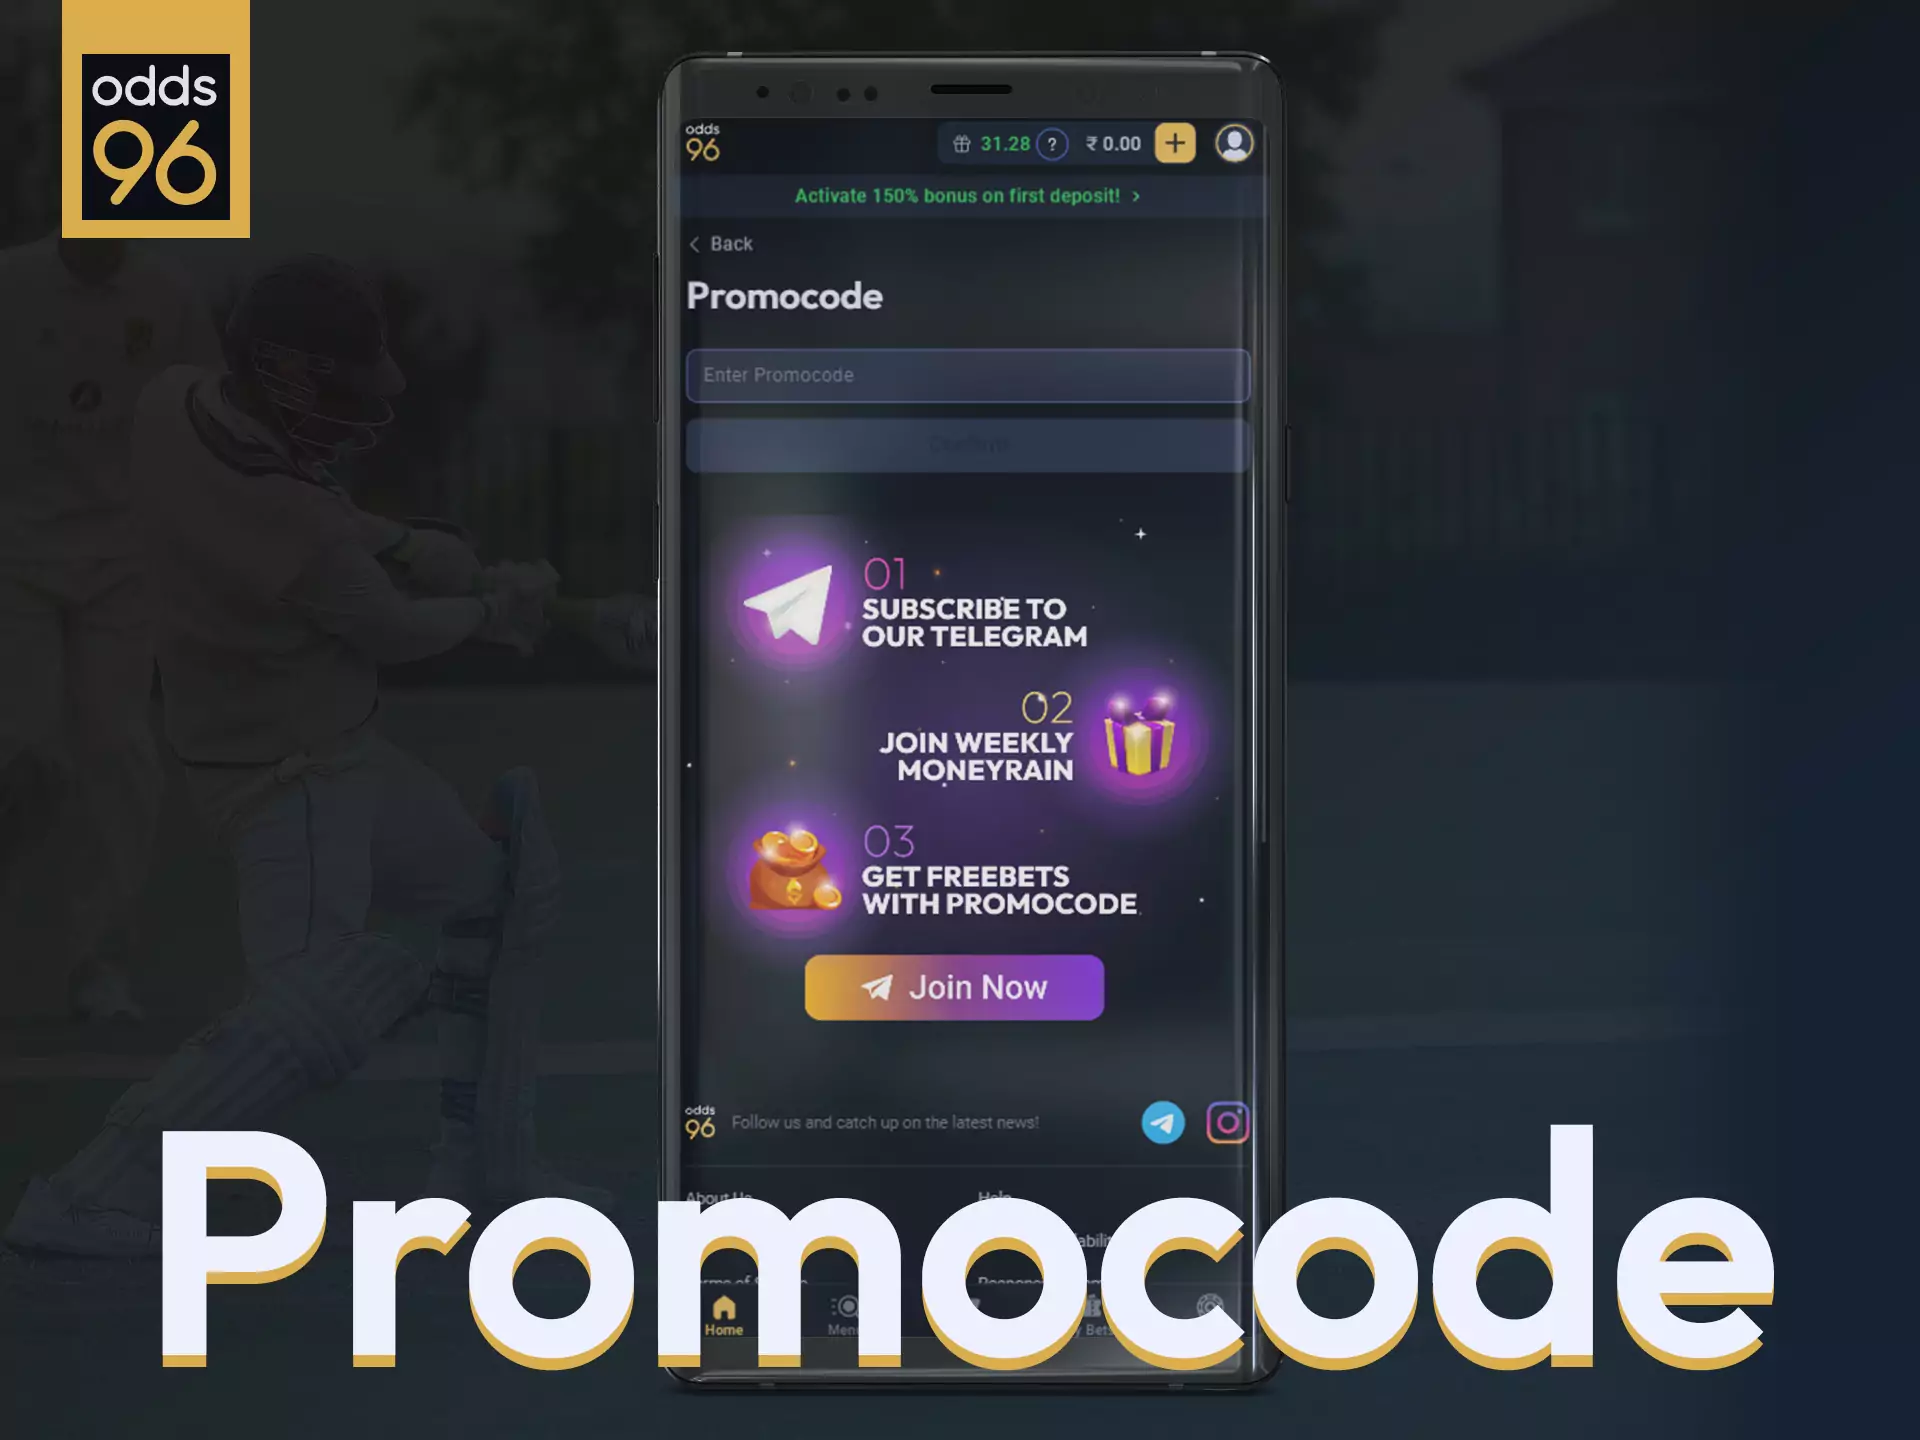 Use the special promo code Odds96, get nice bonuses.